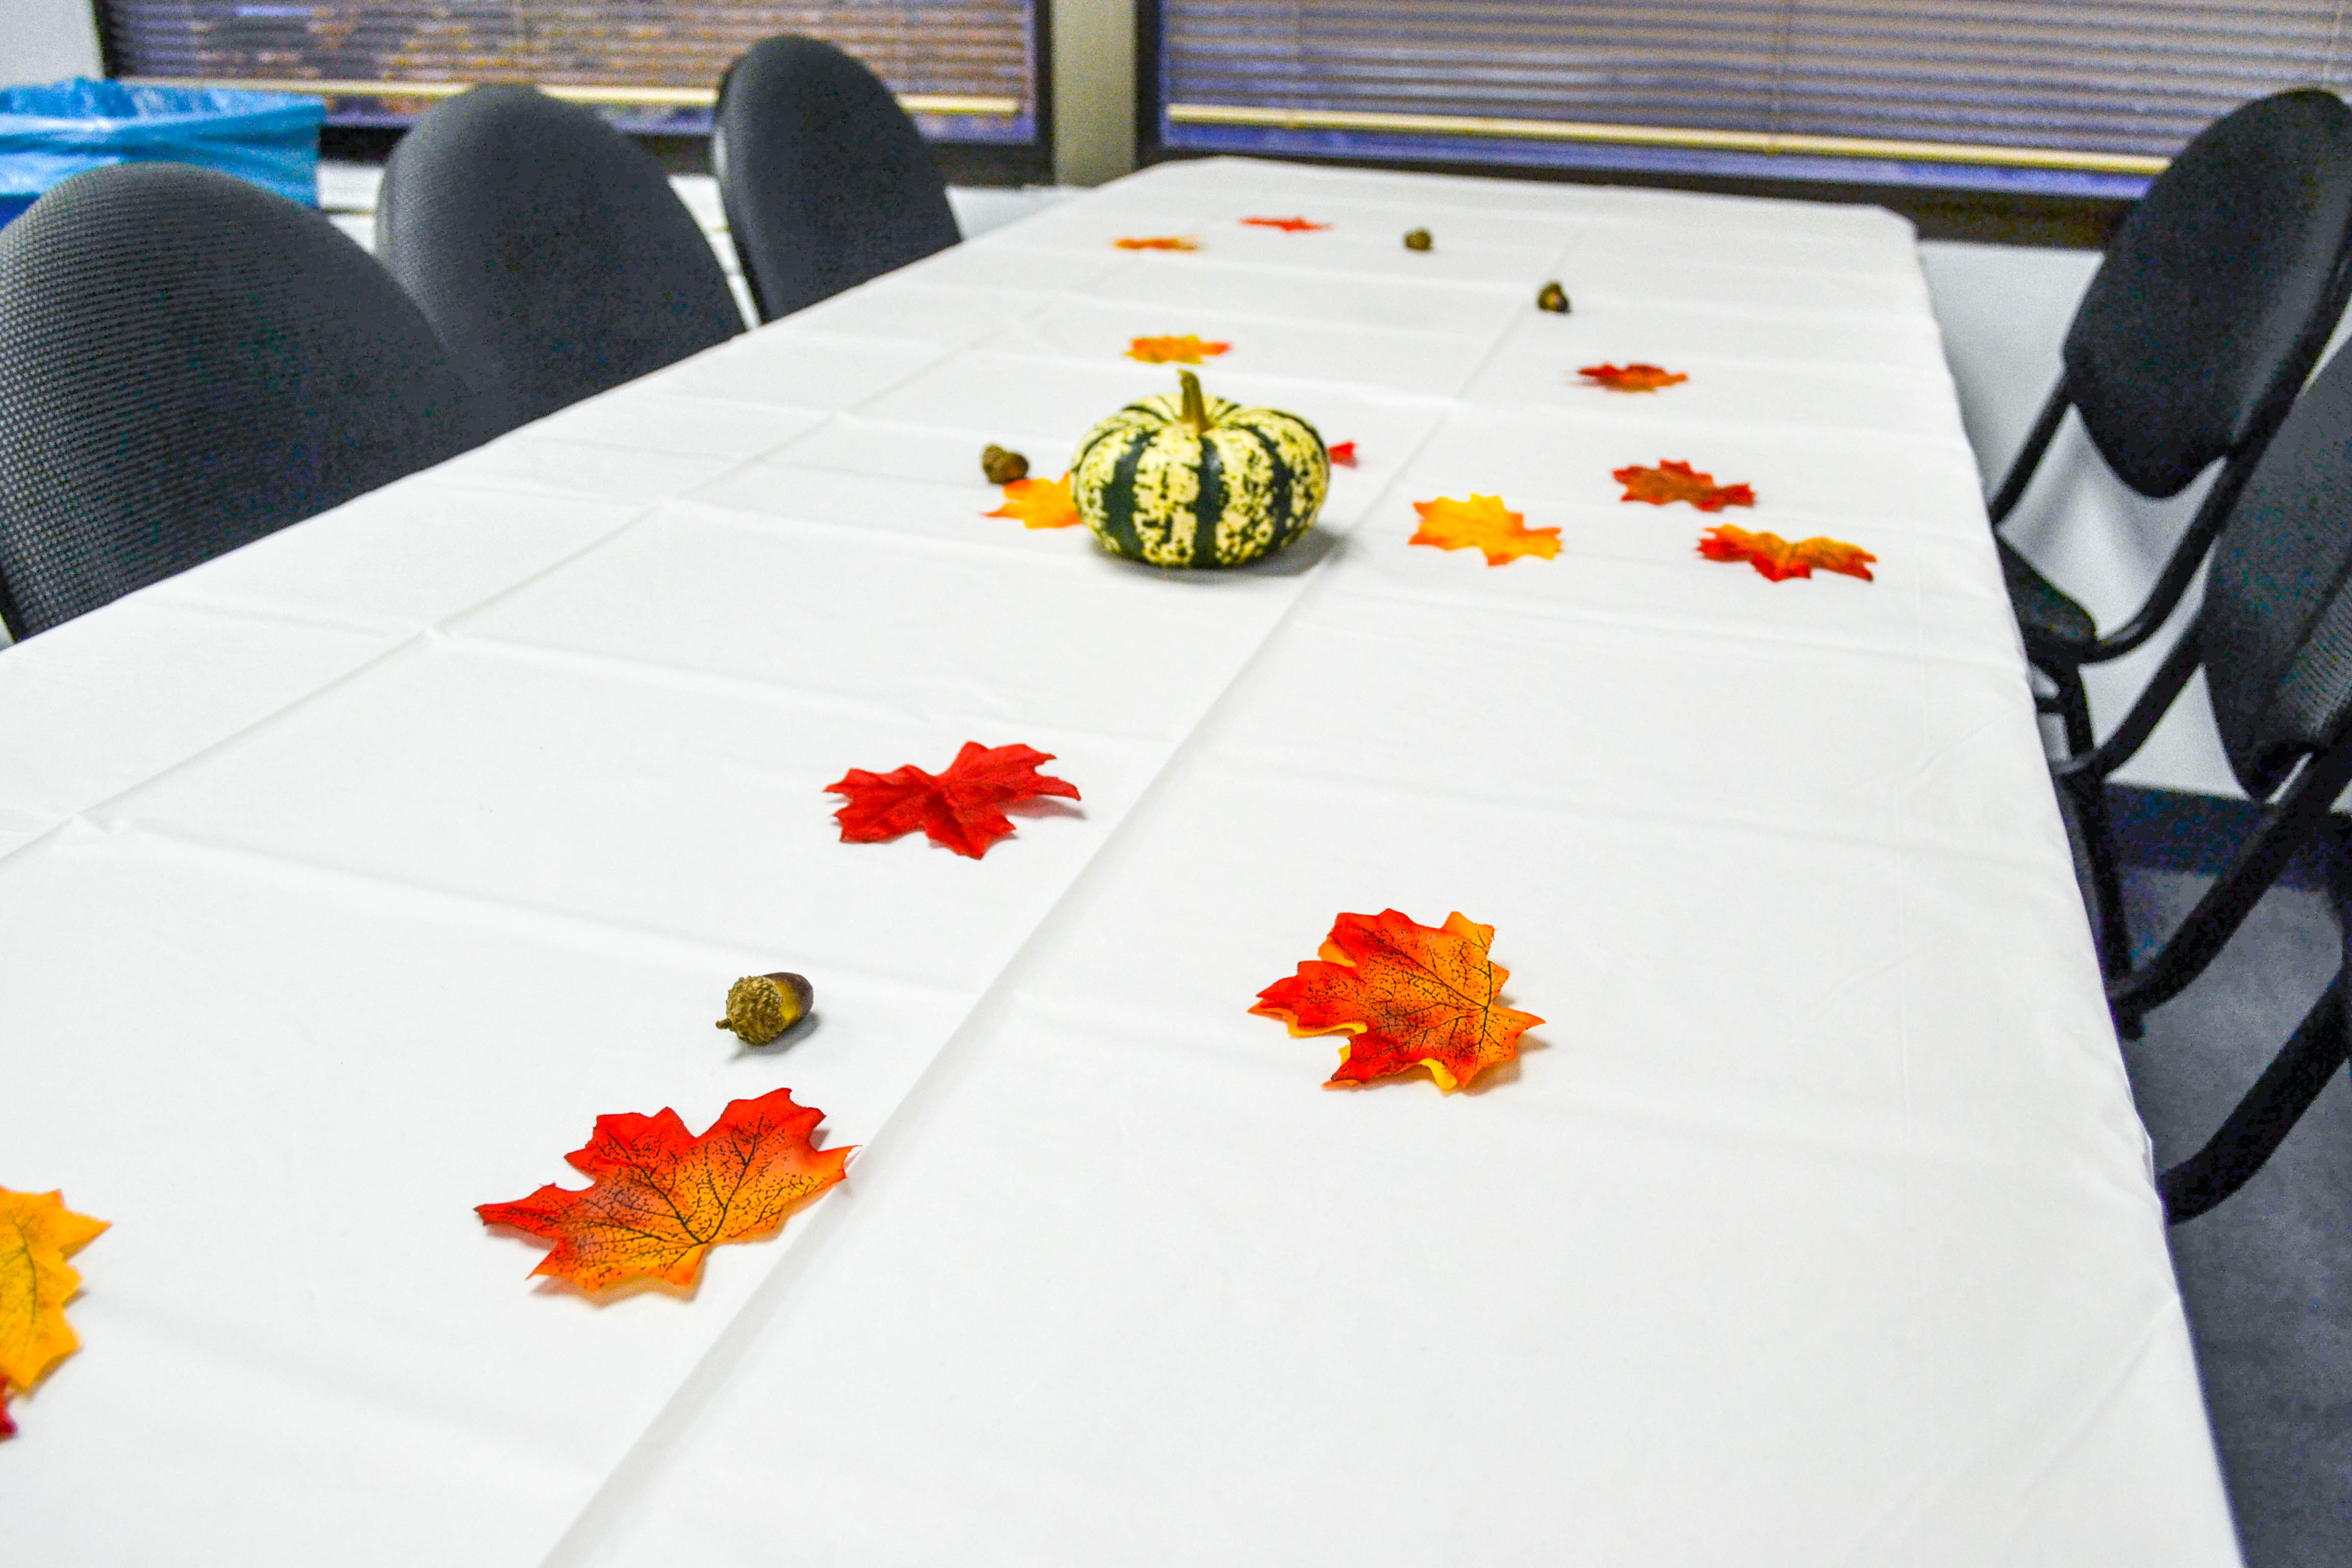 Autumn decorations featured at Diplomatic Language Services for fall